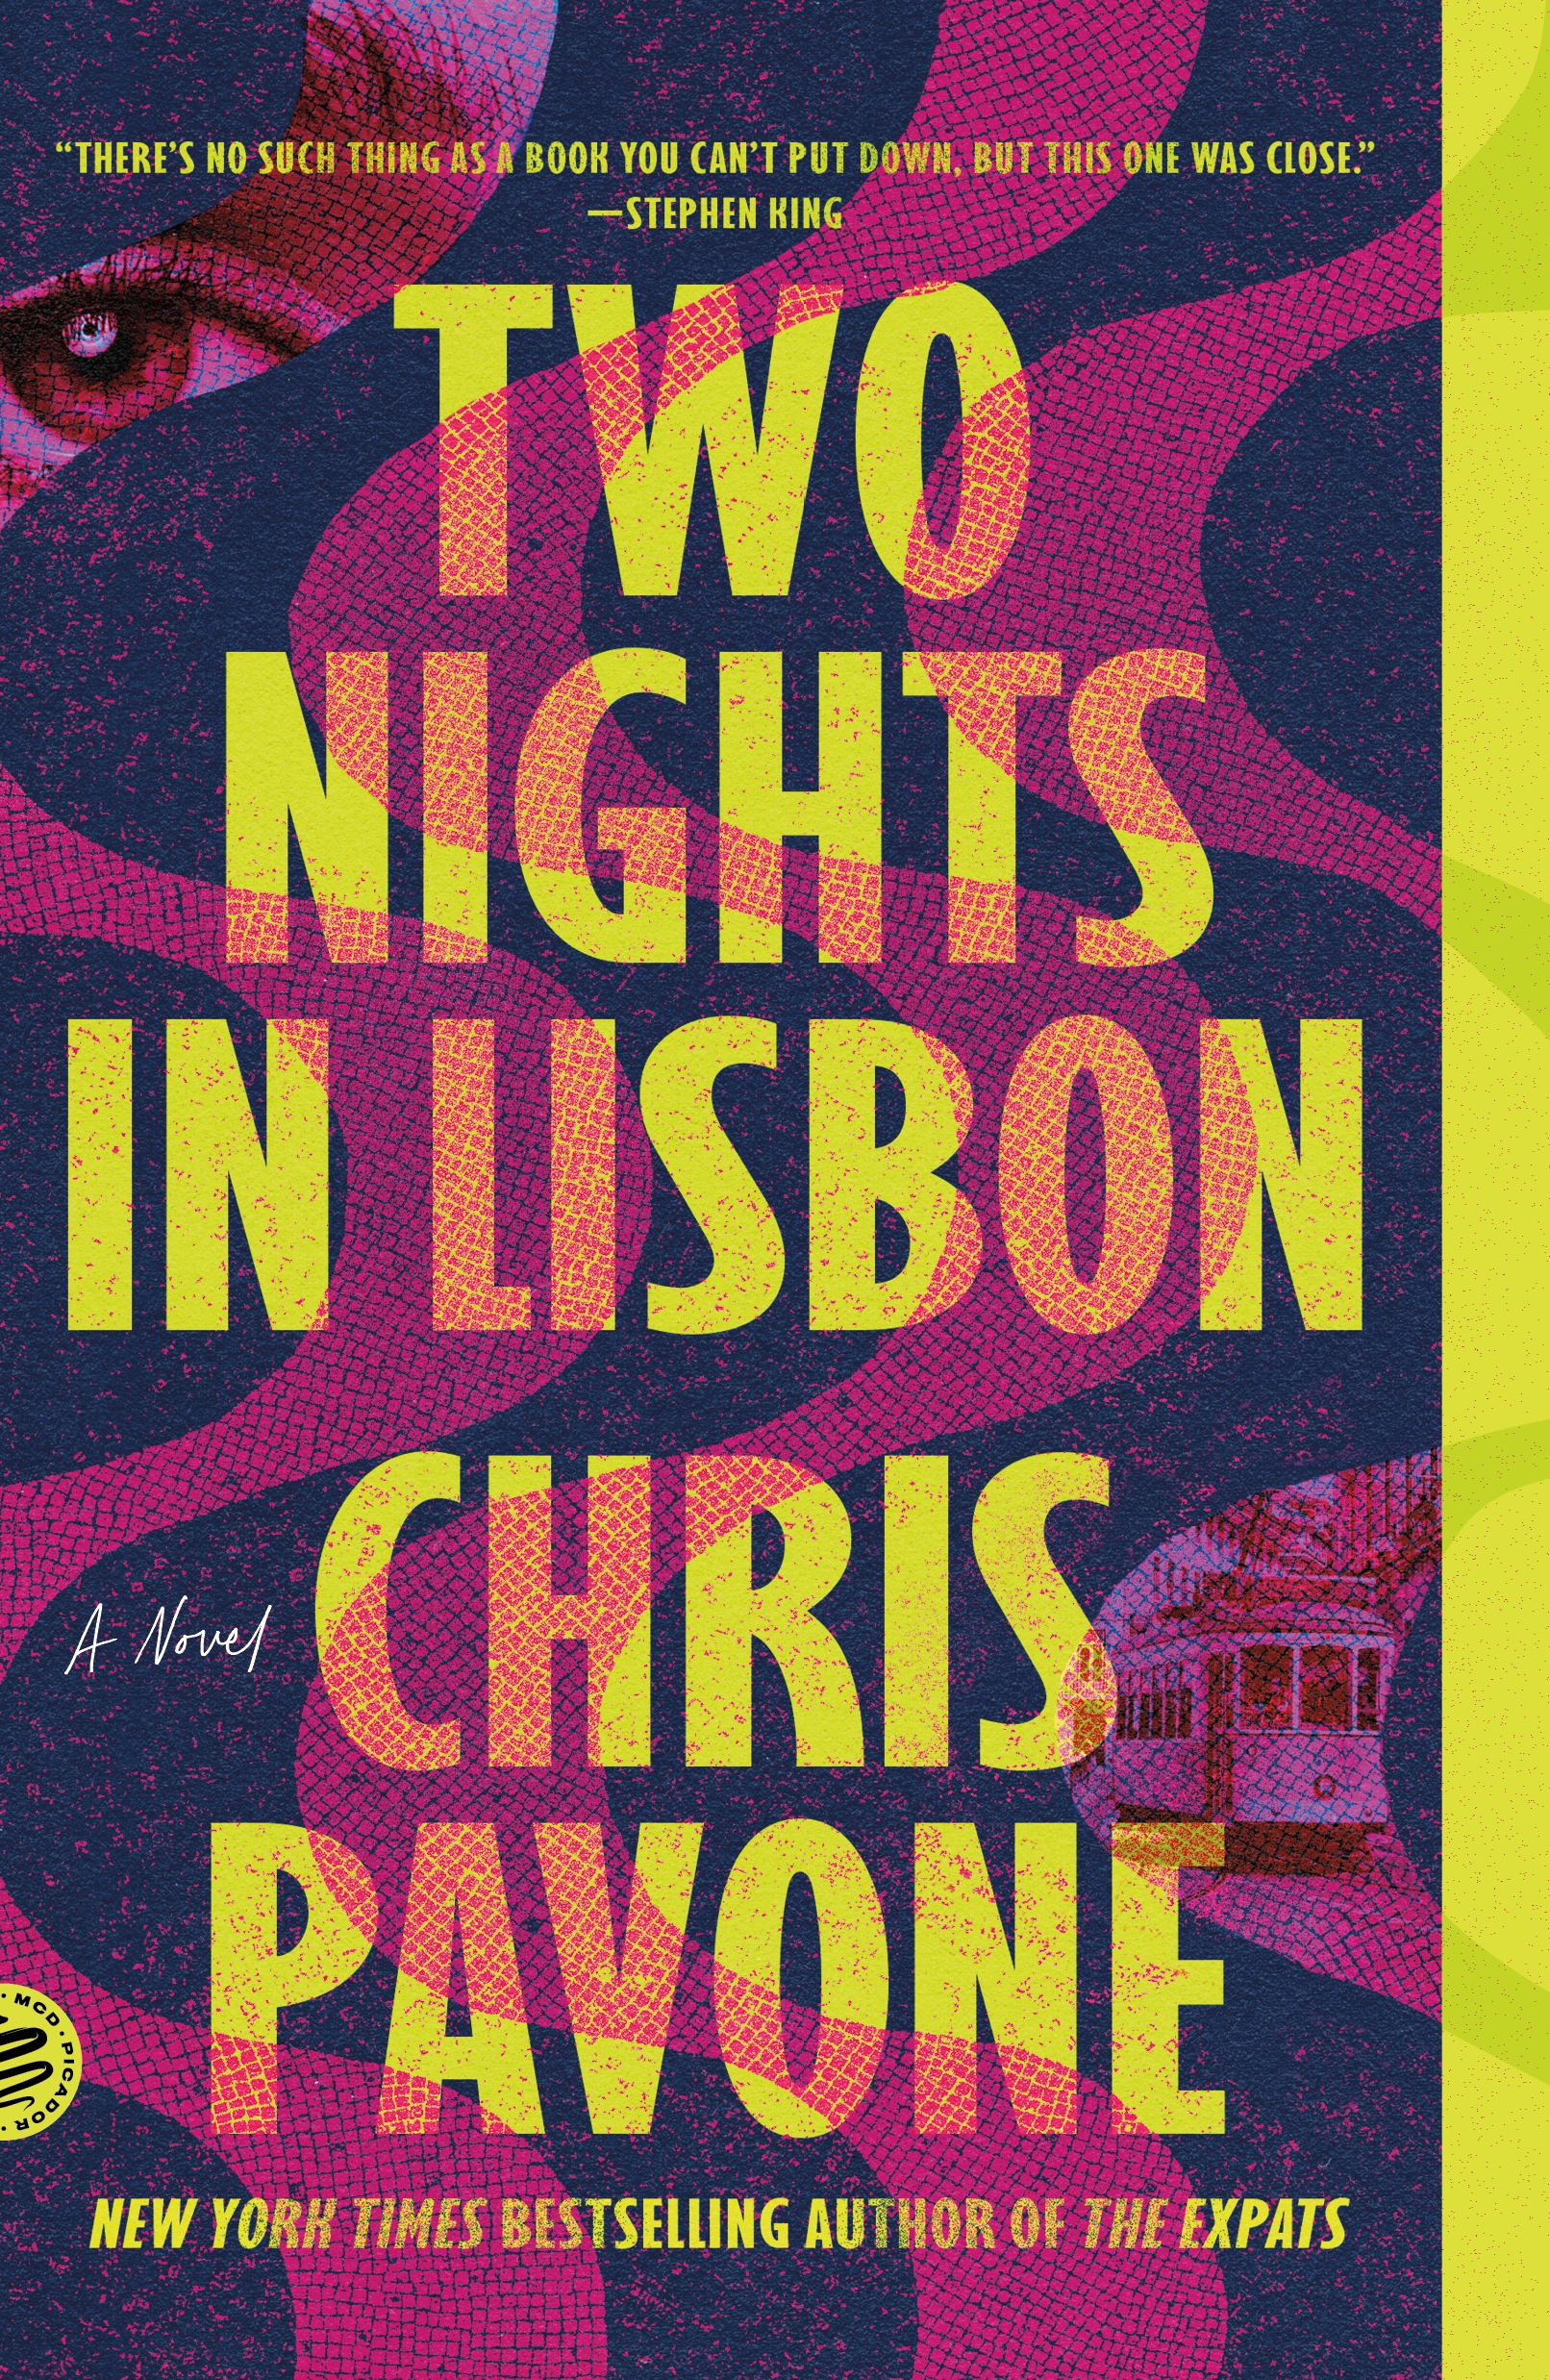 Two Nights in Lisbon cover image